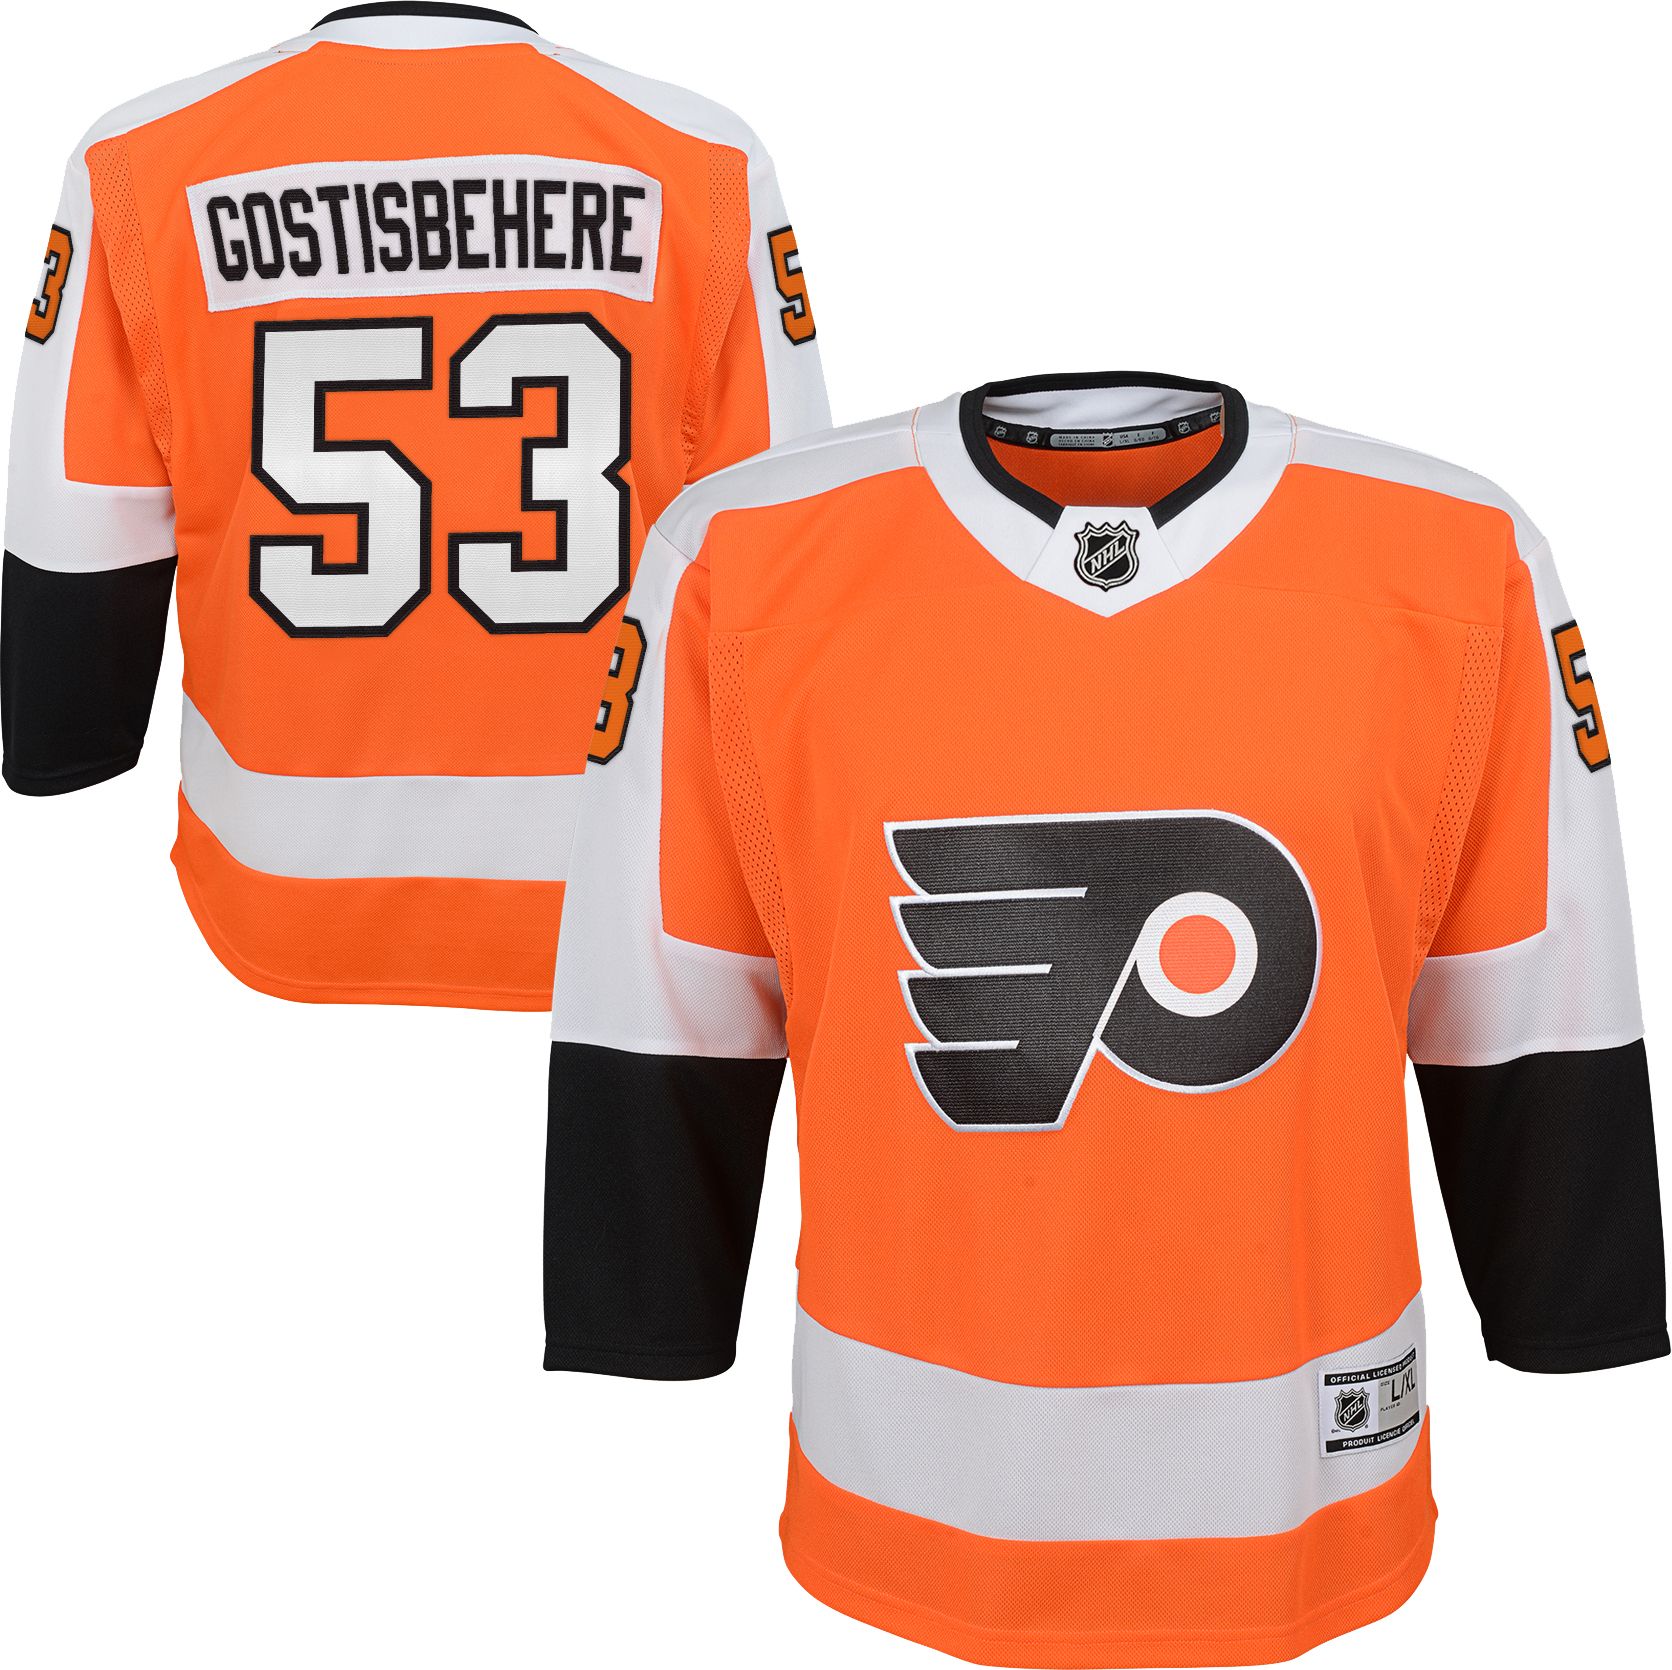 gostisbehere youth jersey